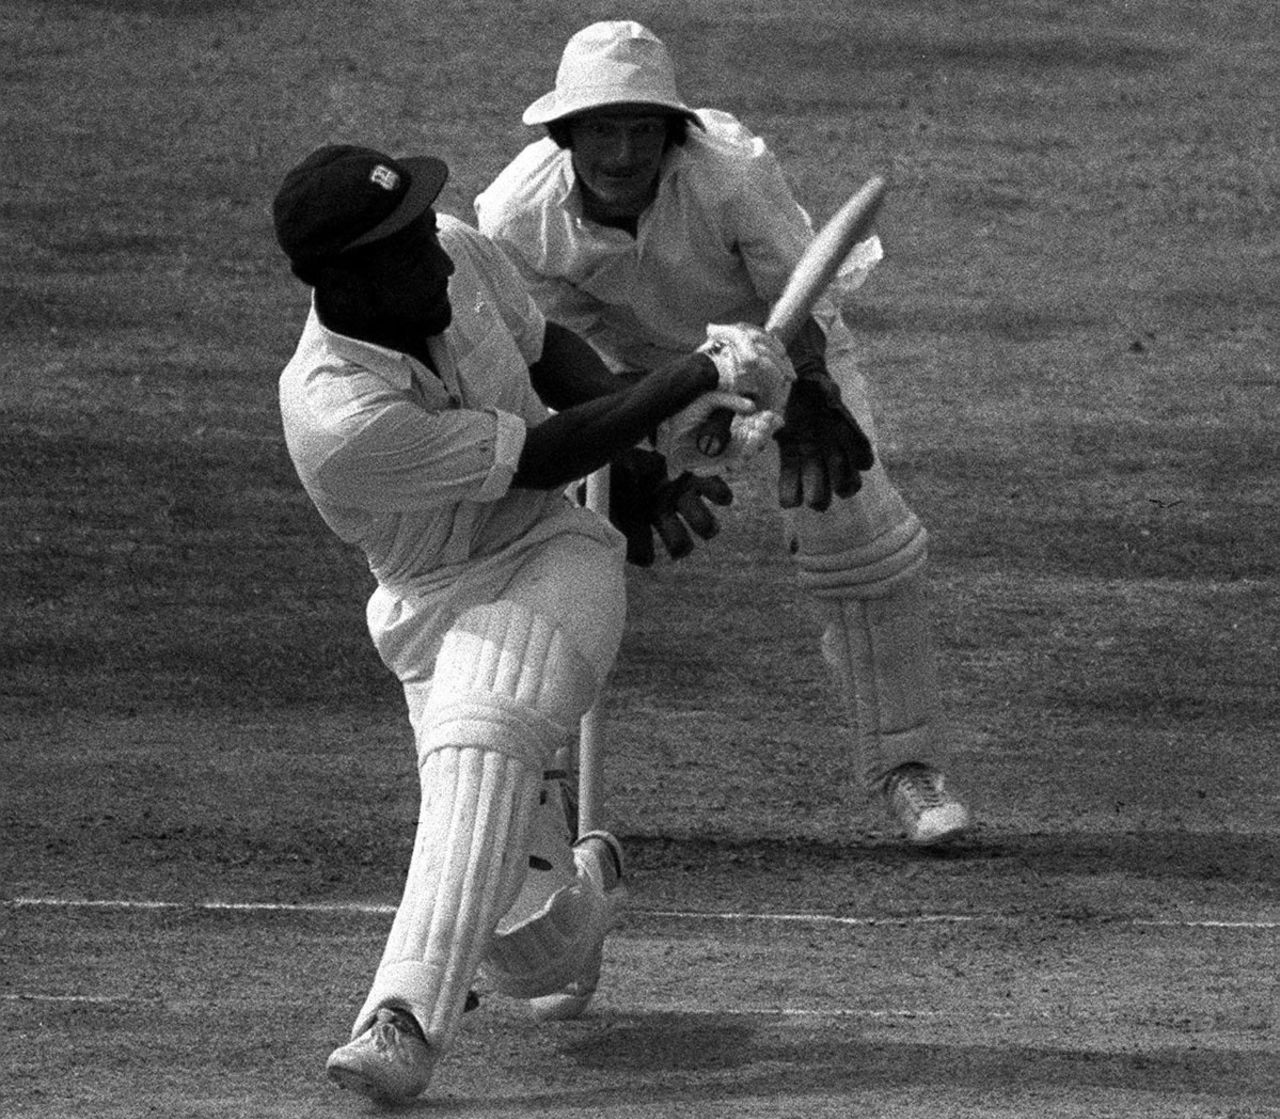 Viv Richards bats, England v West Indies, 5th Test, The Oval, 1st day, August 12, 1976